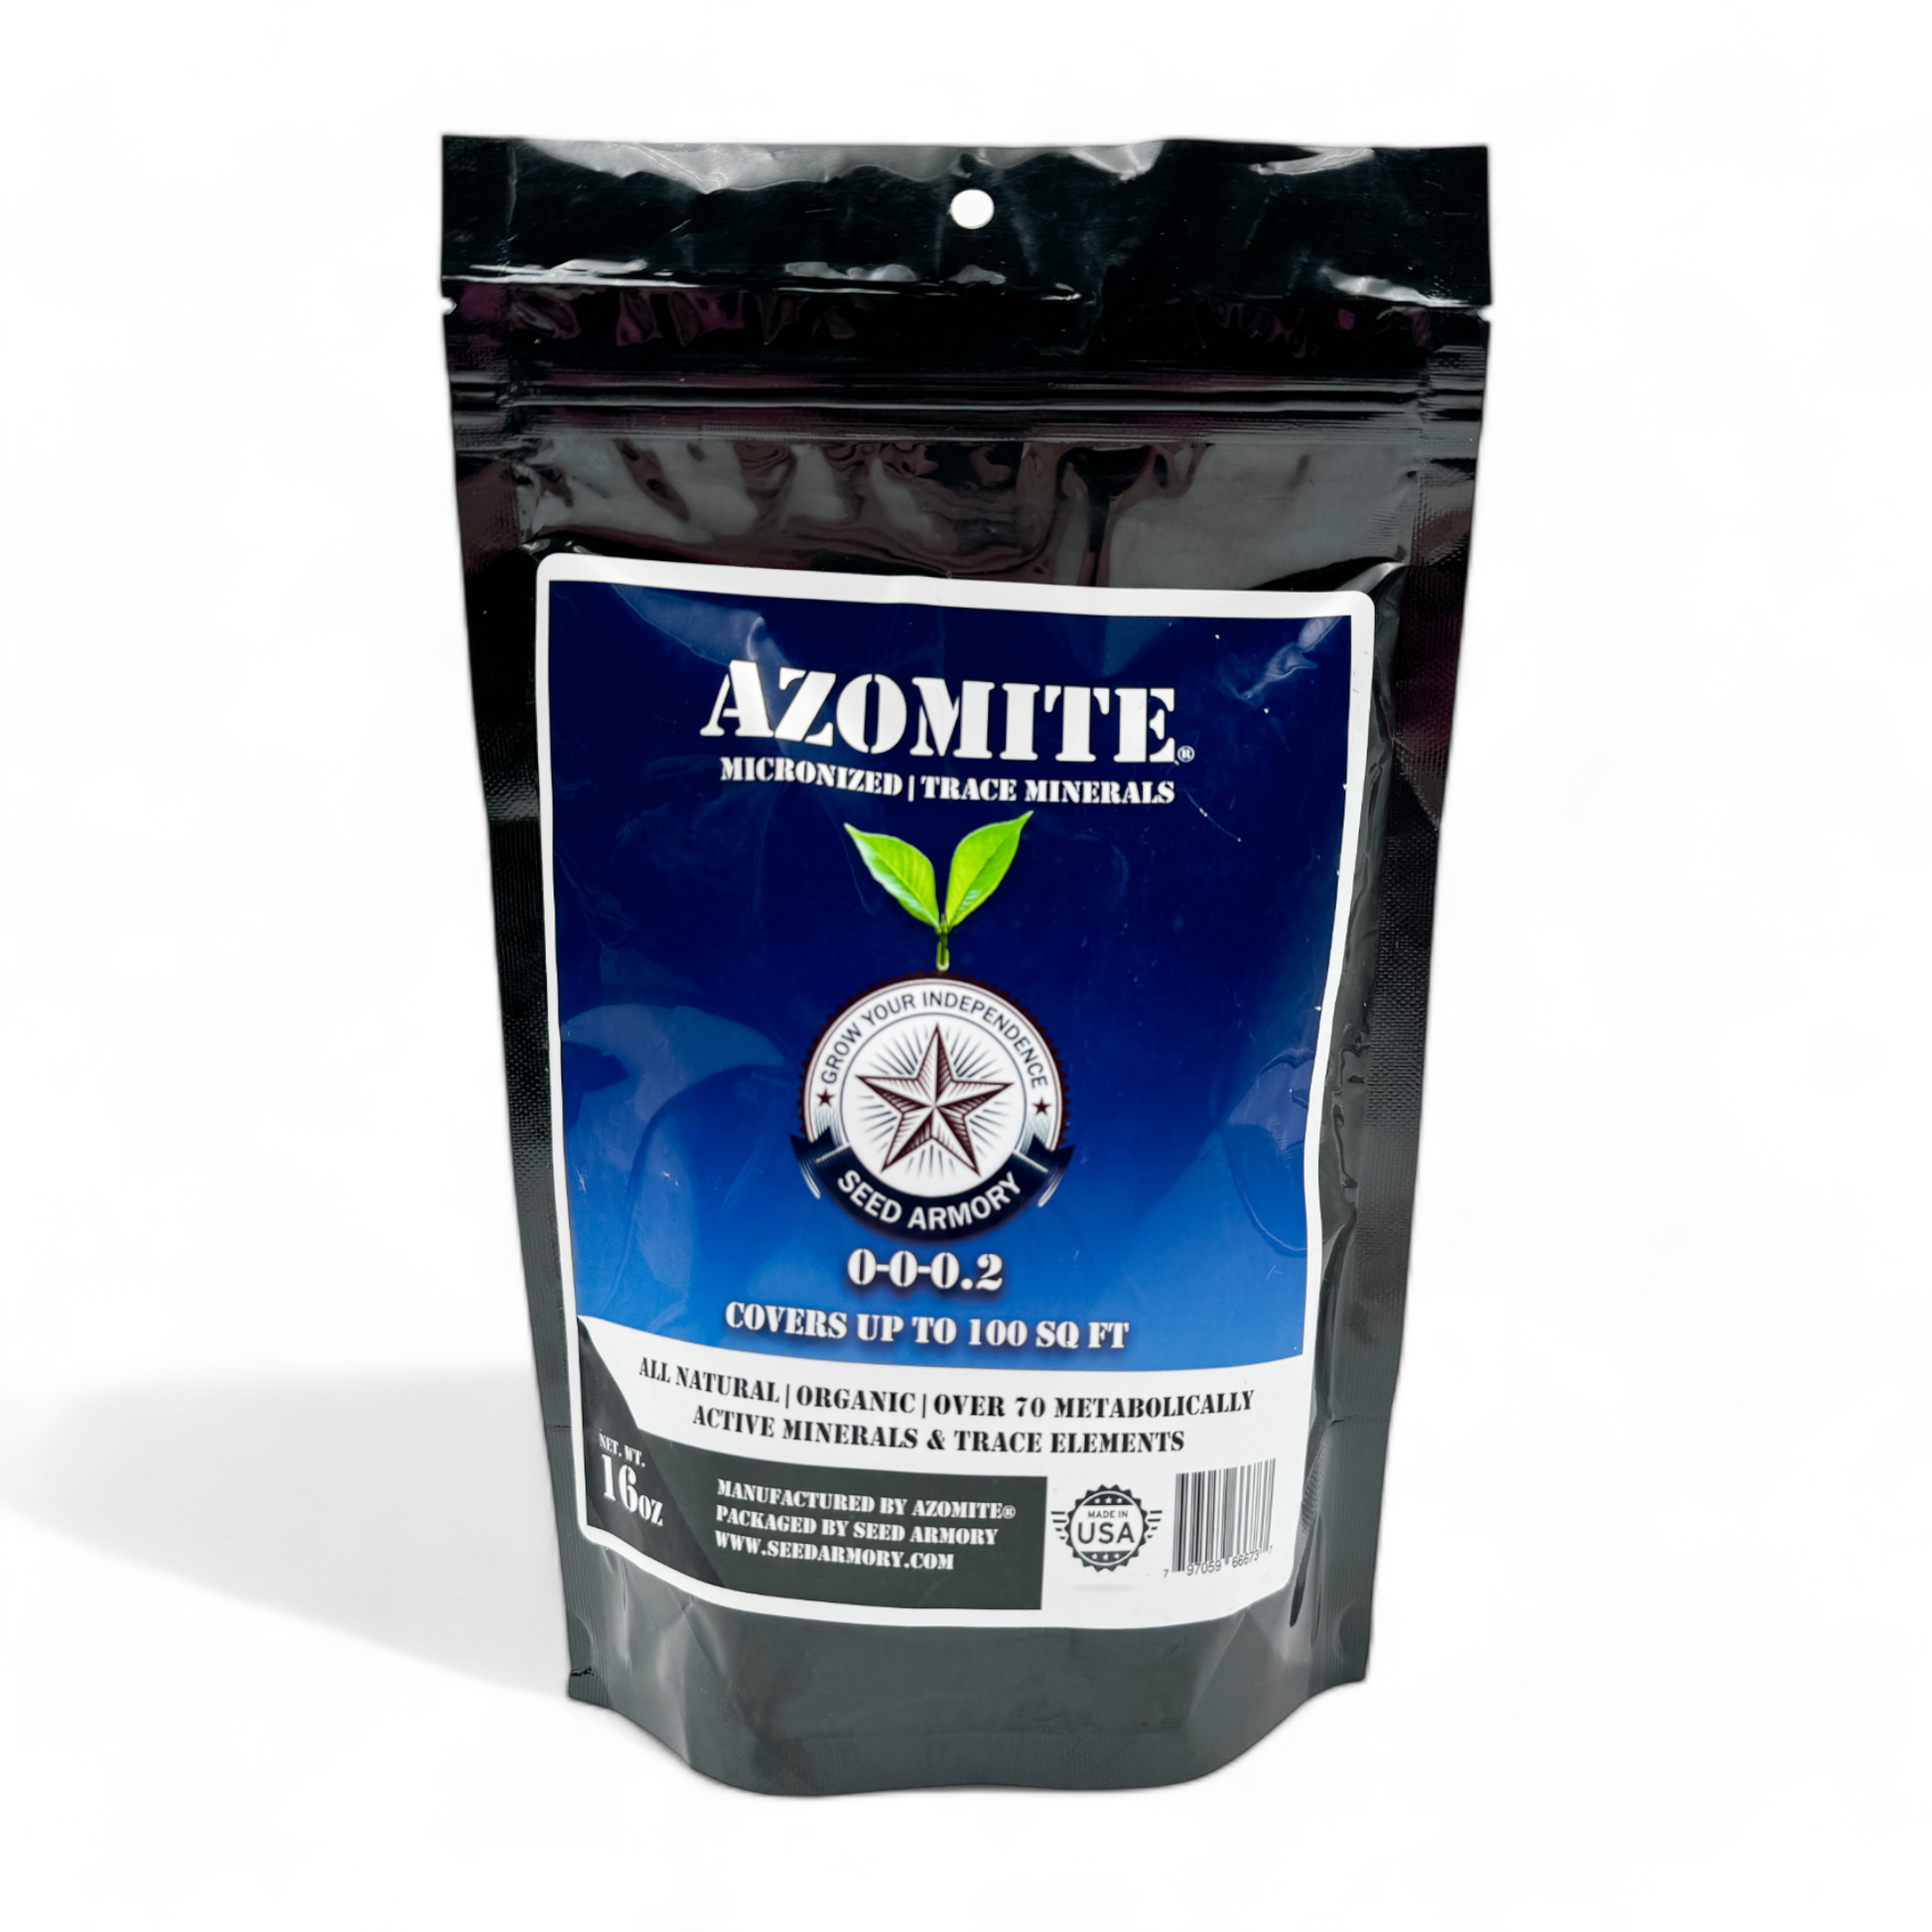 Front package of Azomite Micronized Powder for gardening